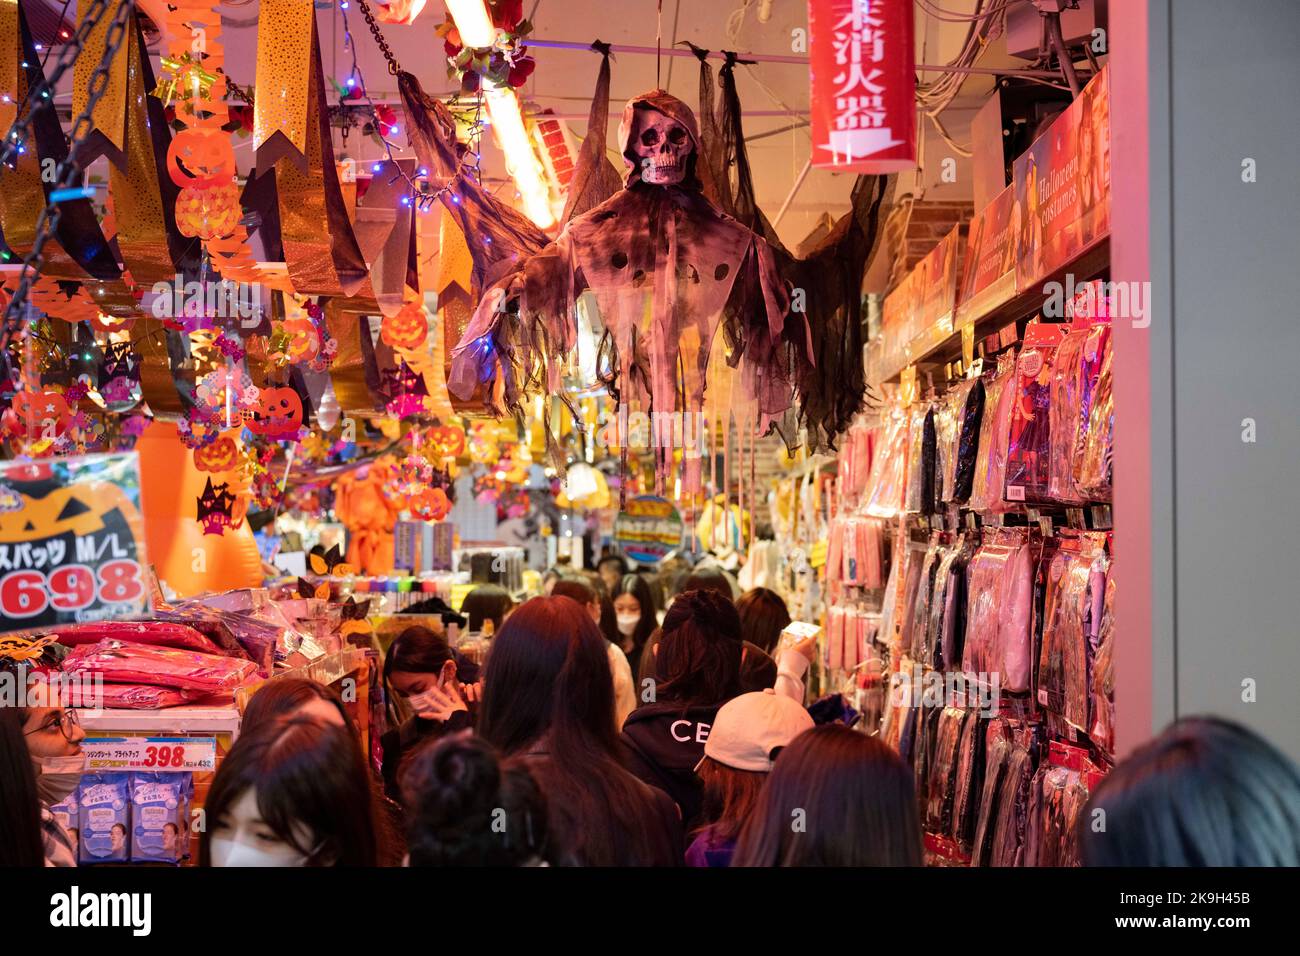 Tokyo, Japan. 28th Oct, 2022. Tokyoites shop for Halloween costumes at the Don Quijote Mega-store on Friday before weekend celebrations in Japan. Japan has recently reopened to tourism after over two years of travel bans due to the COVID-19 pandemic. The Yen has greatly depreciated against the USD US Dollar, creating economic turmoil for international trade and the Japanese economy. Tourists can shop tax free in Japan on a Temporary Visitor visa. (Credit Image: © Taidgh Barron/ZUMA Press Wire) Stock Photo